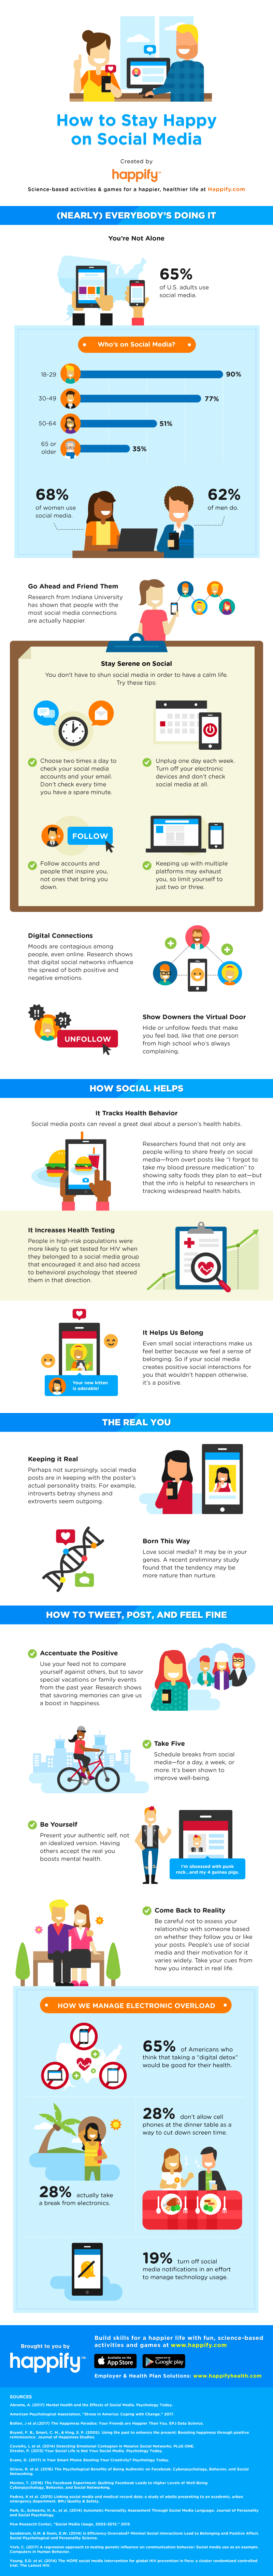 How to stay happy on Social Media [infographic]